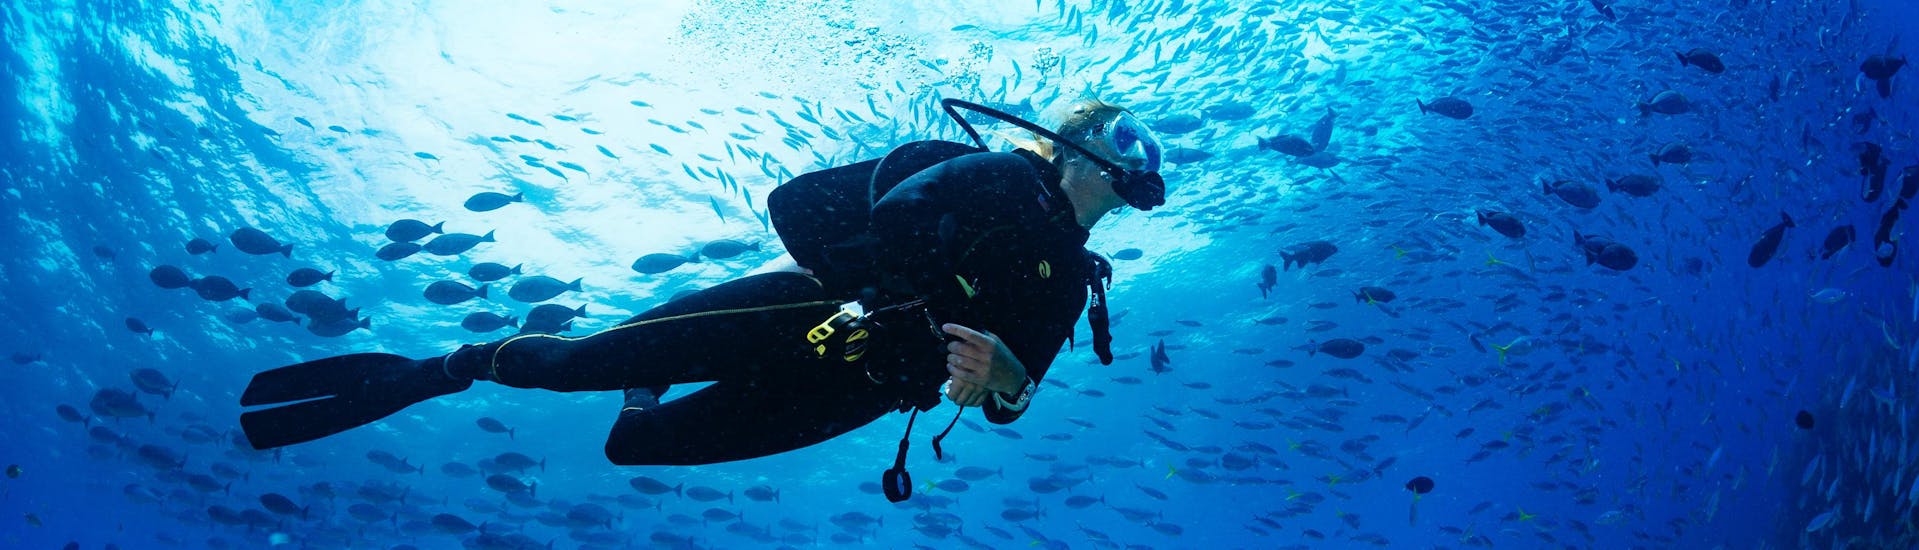 Scuba diving in the most incredible spots with PADI courses from a local dive centre